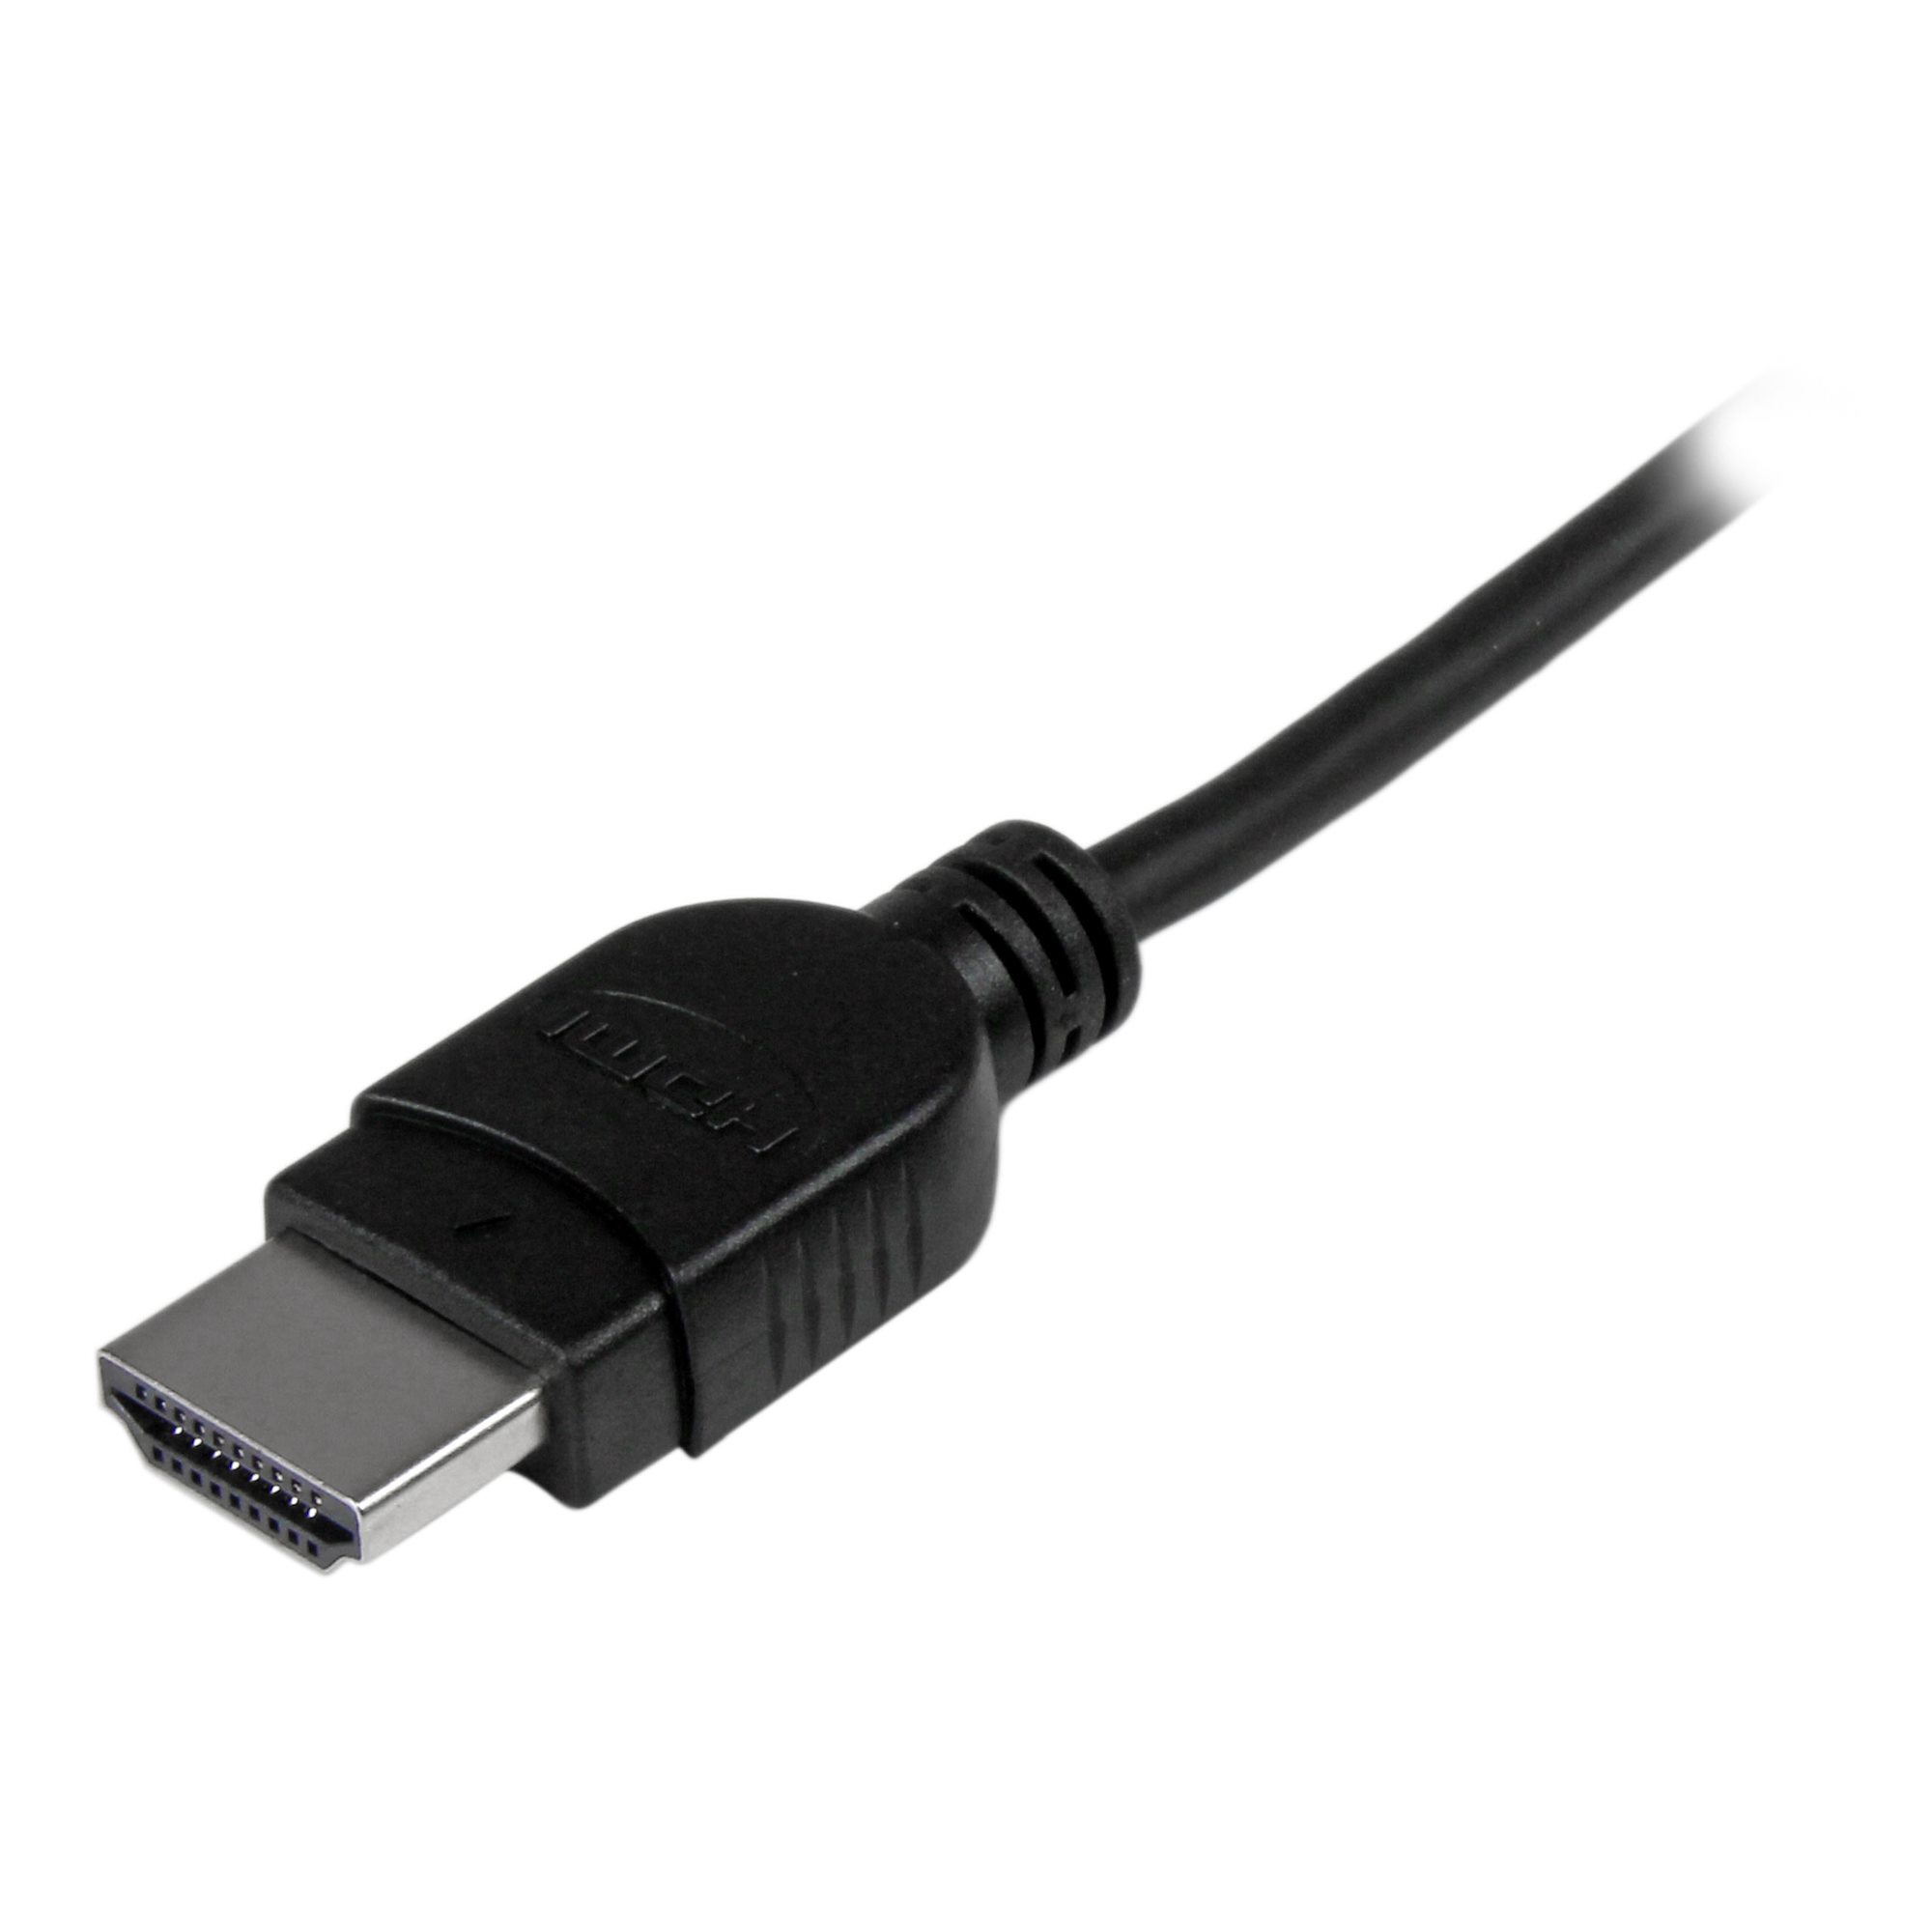 3m Passive 11 Micro USB MHL Cable - Cables & HDMI Adapters | StarTech.com